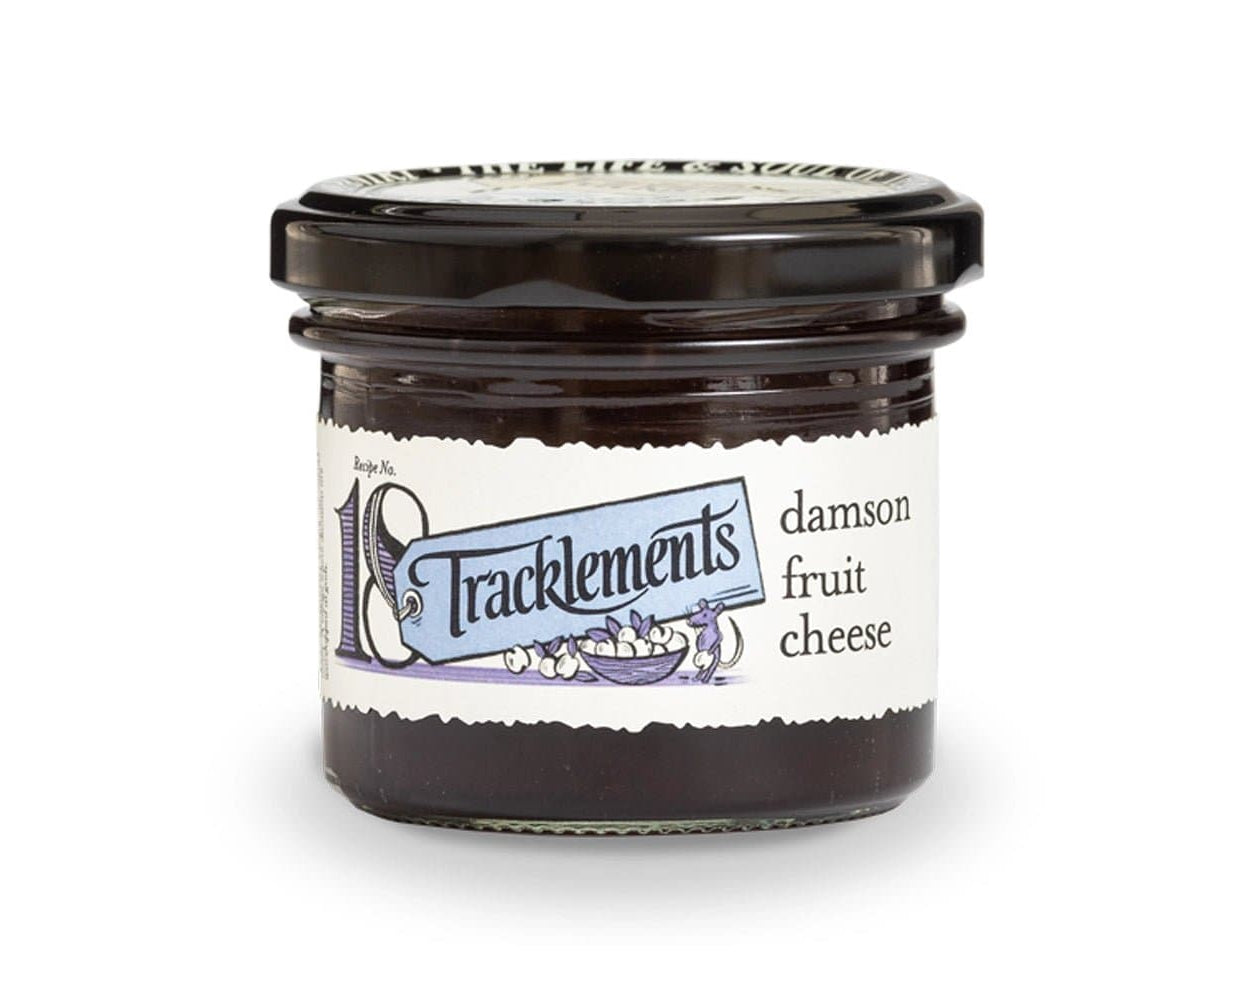 Tracklements Damson Fruit Cheese 120g - IMP & MAKER